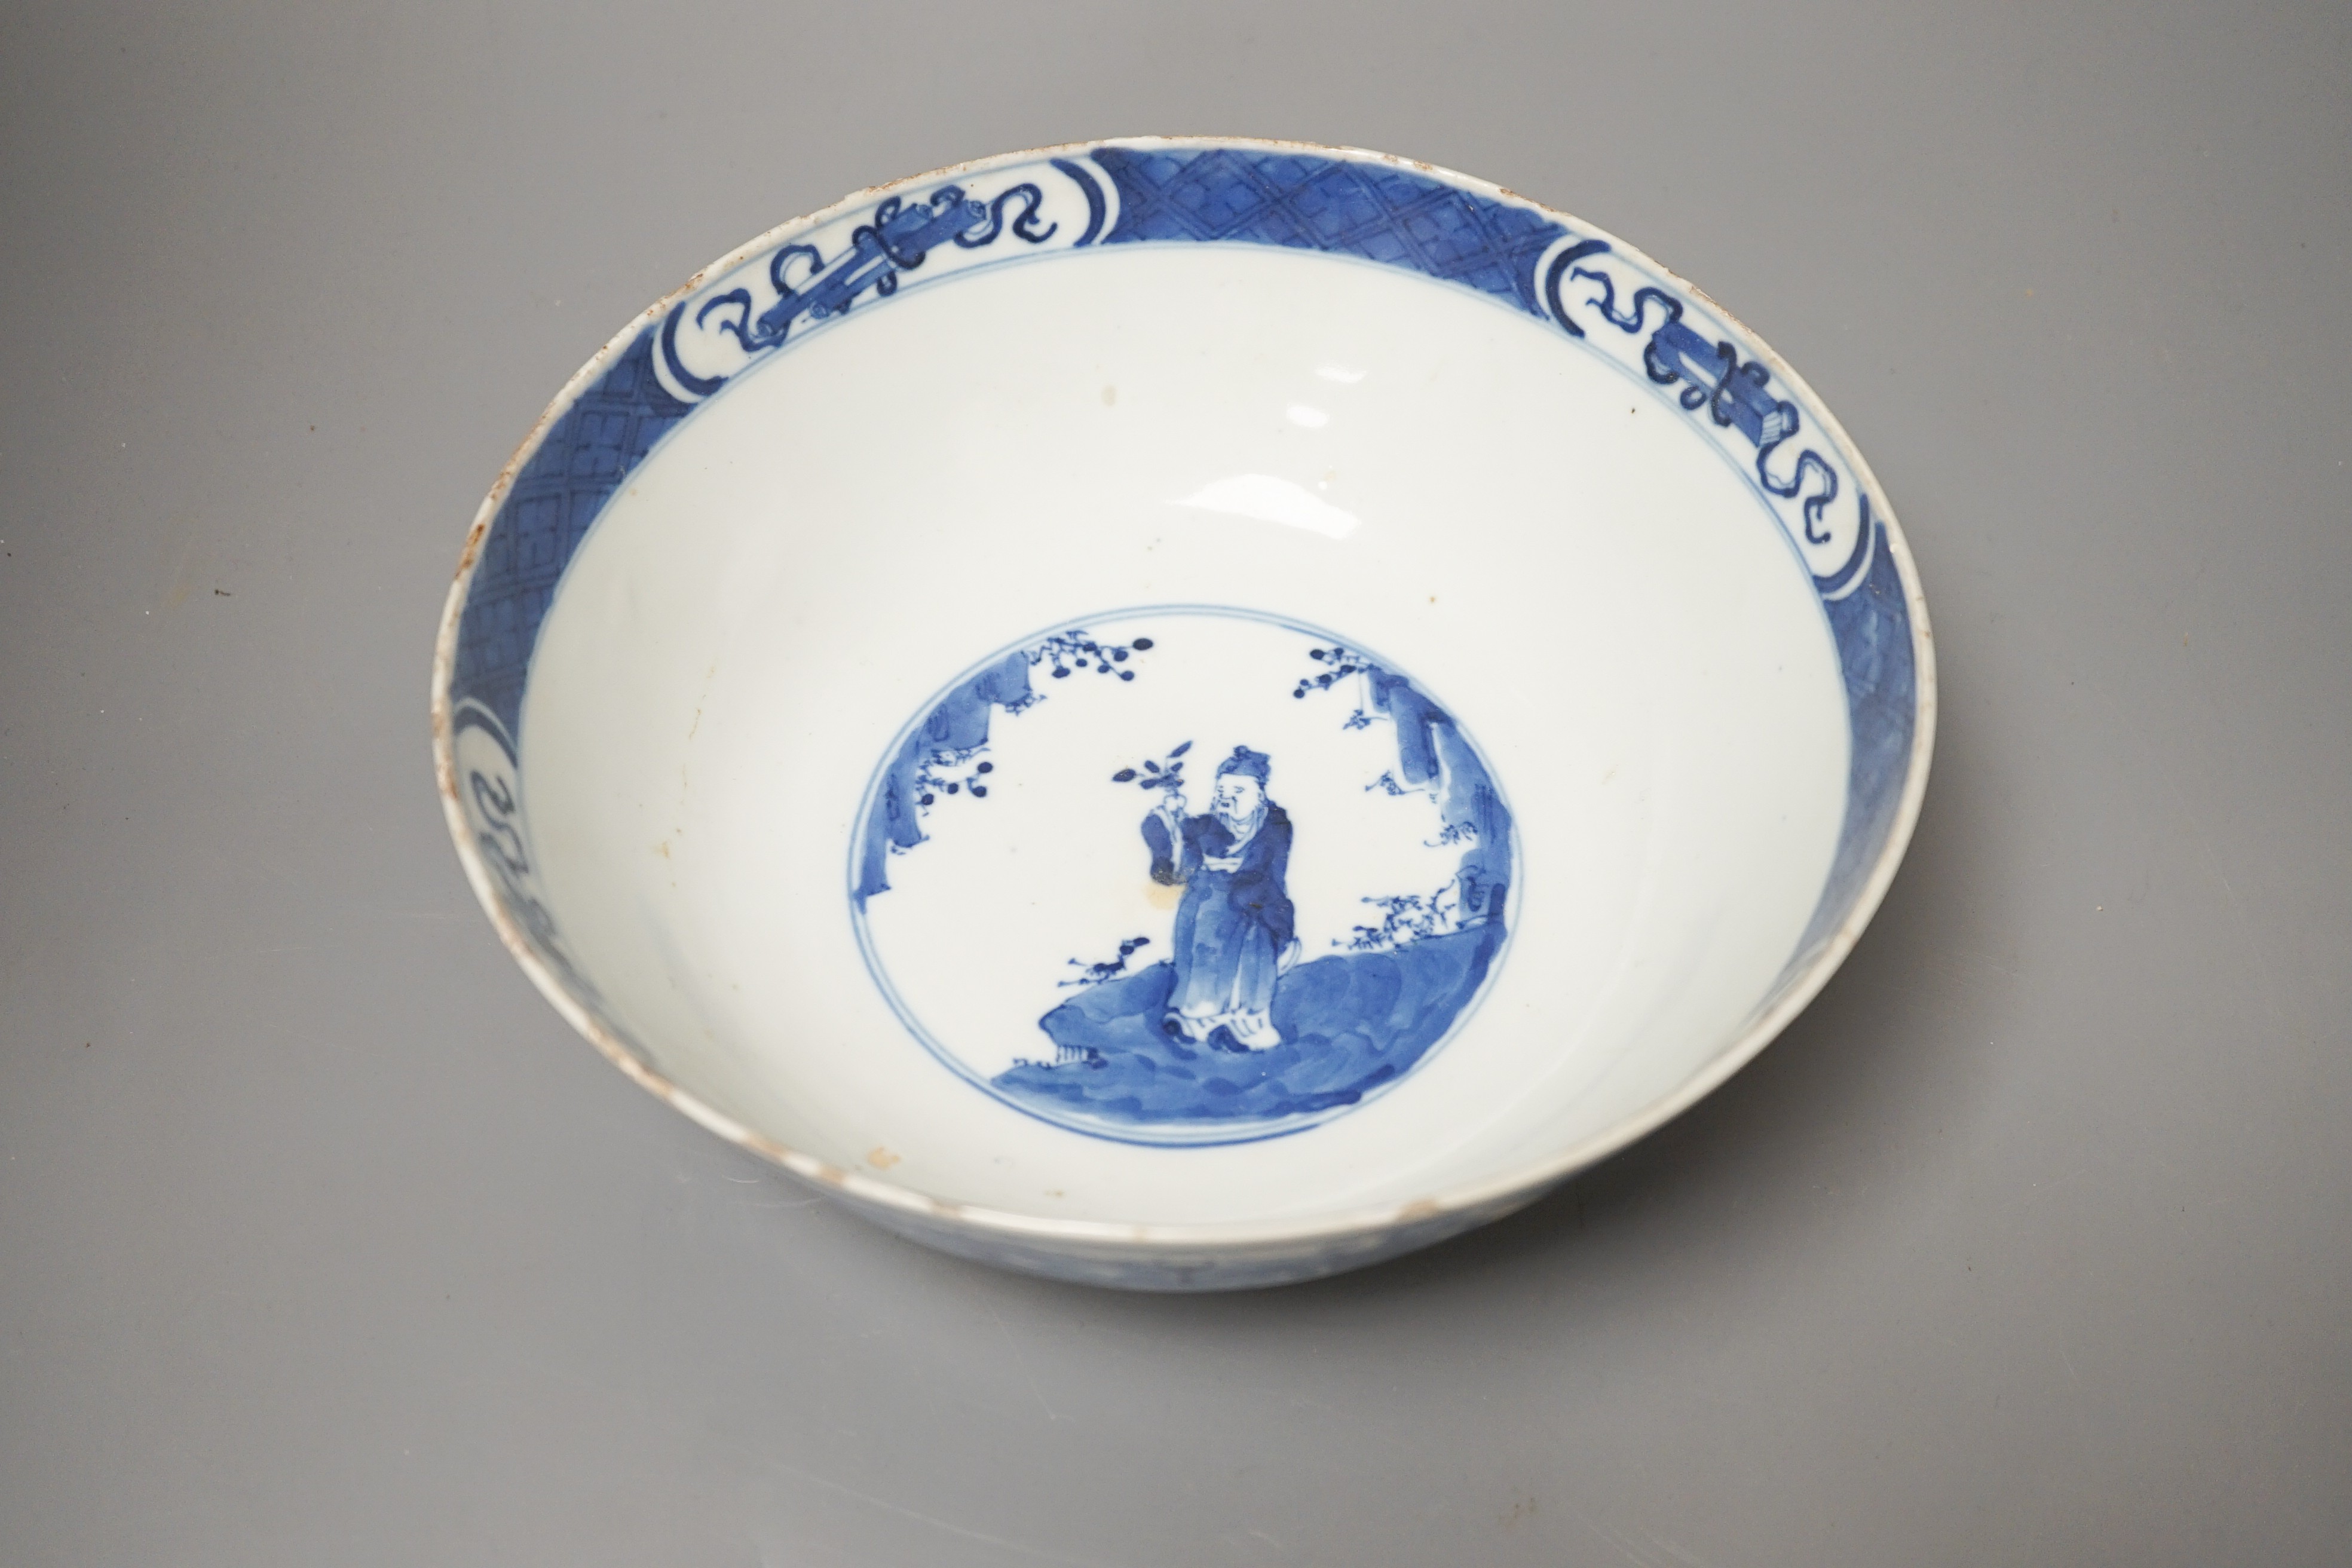 A Chinese blue and white bowl, 19th century 23cm